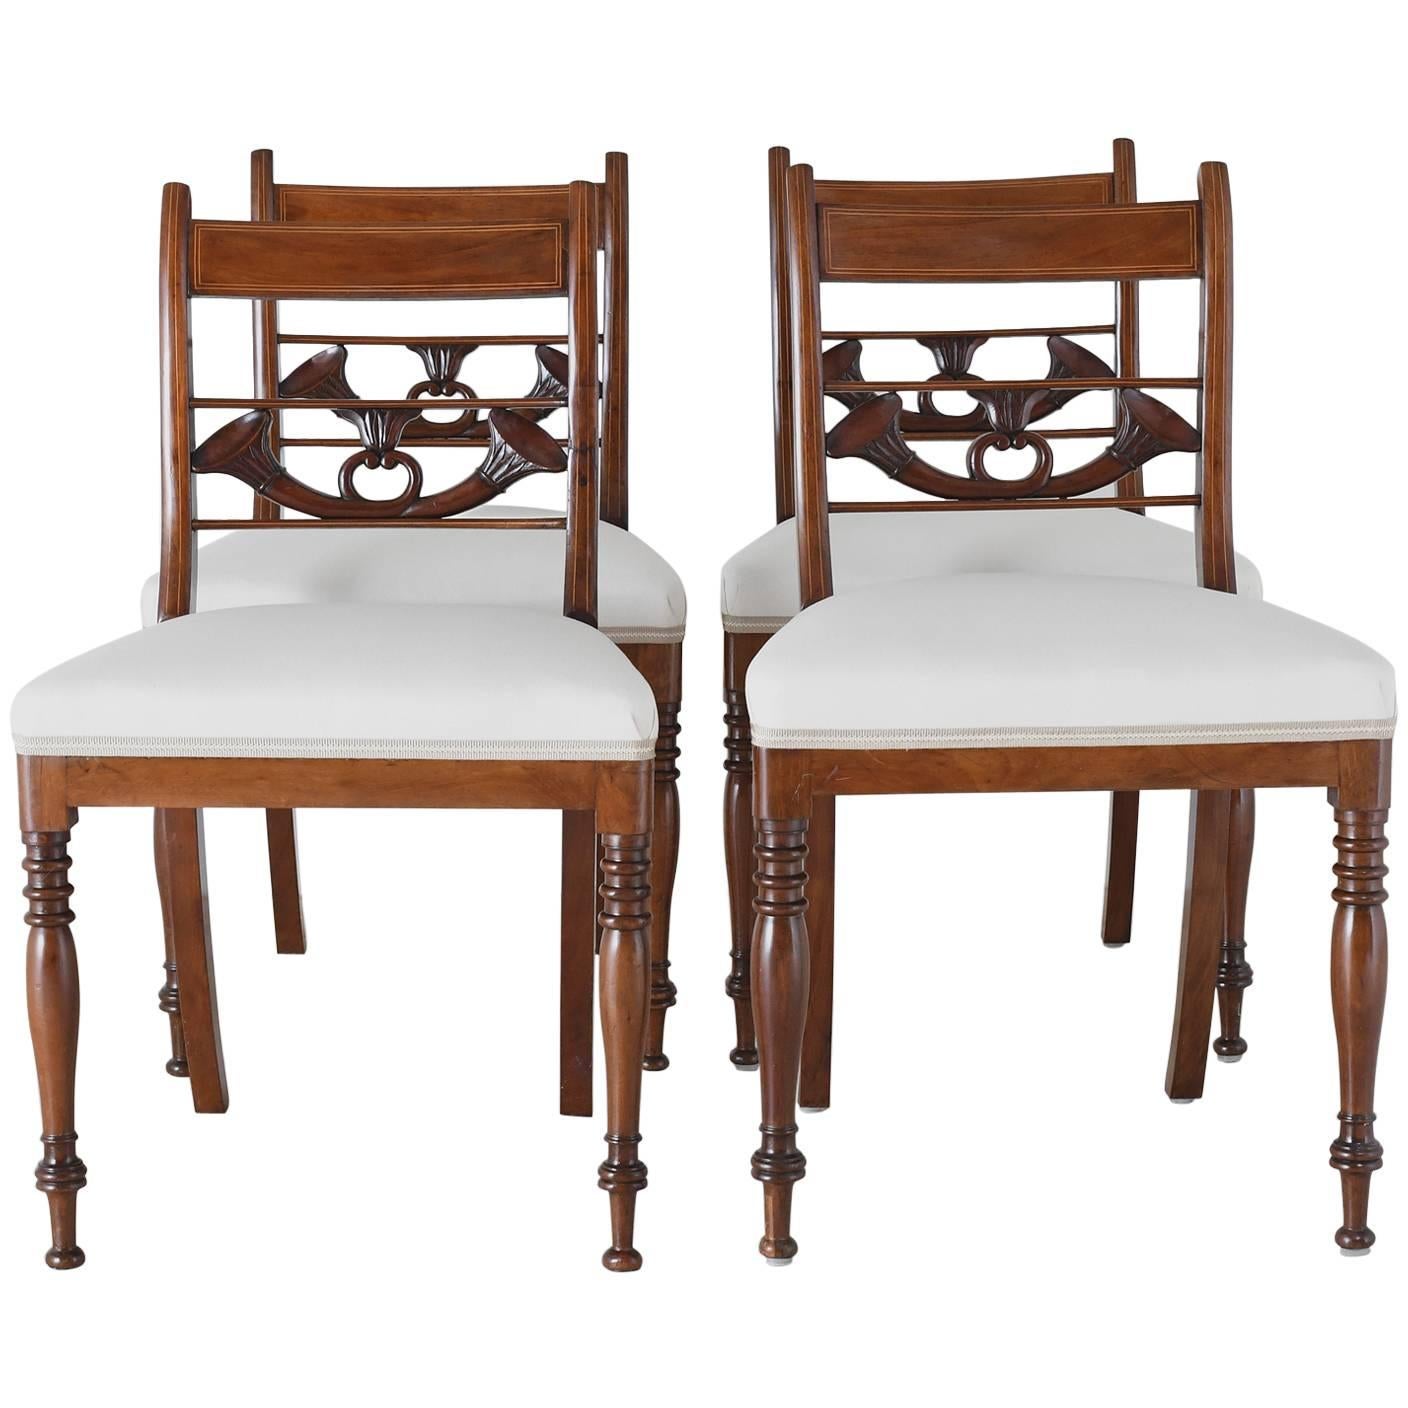 Set of 4 Antique English Regency Dining Chairs in Mahogany w/ Upholstered Seat For Sale